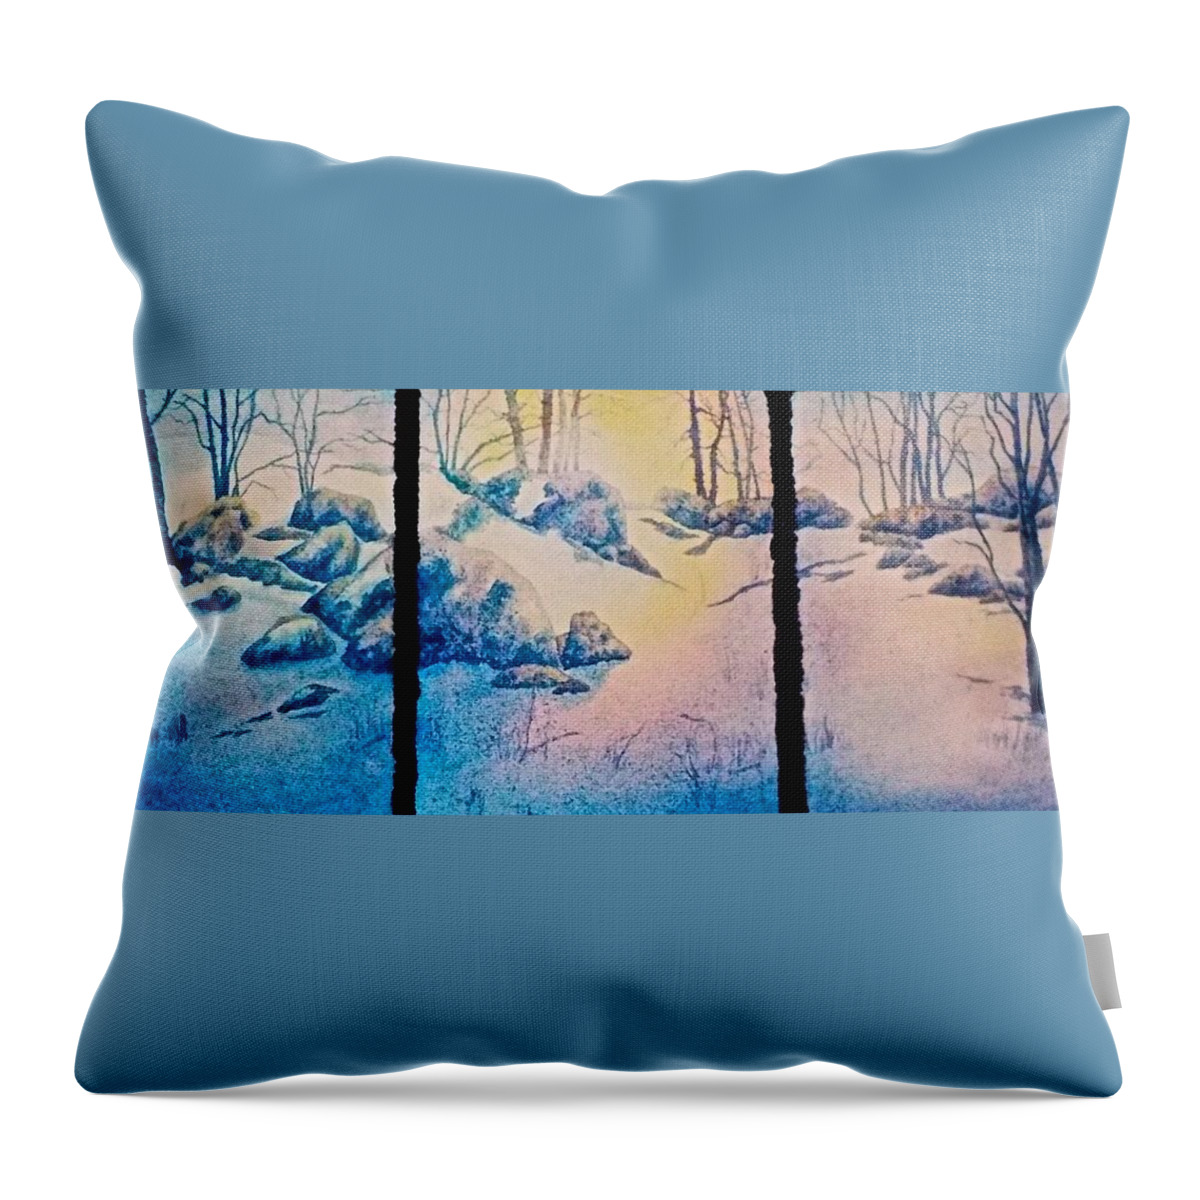 Watercolor Throw Pillow featuring the painting Morning Light by Carolyn Rosenberger